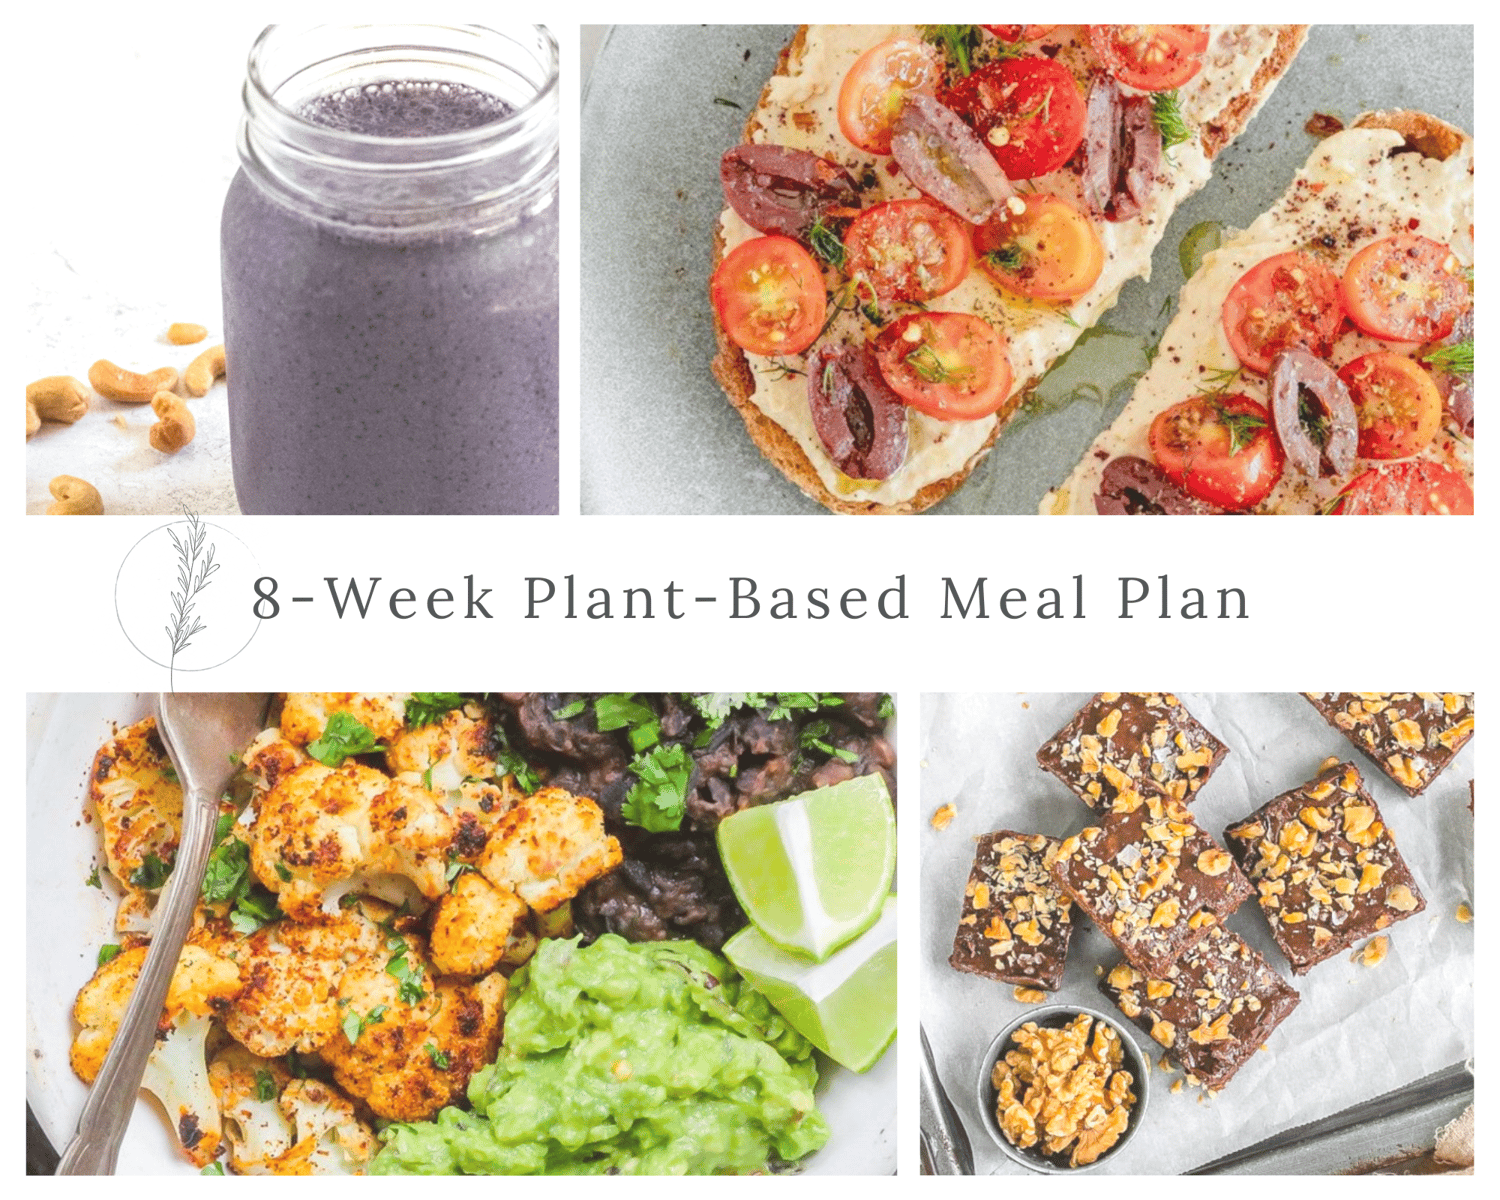 Here Are 8 Week's Worth of Plant-Based Meal Plans